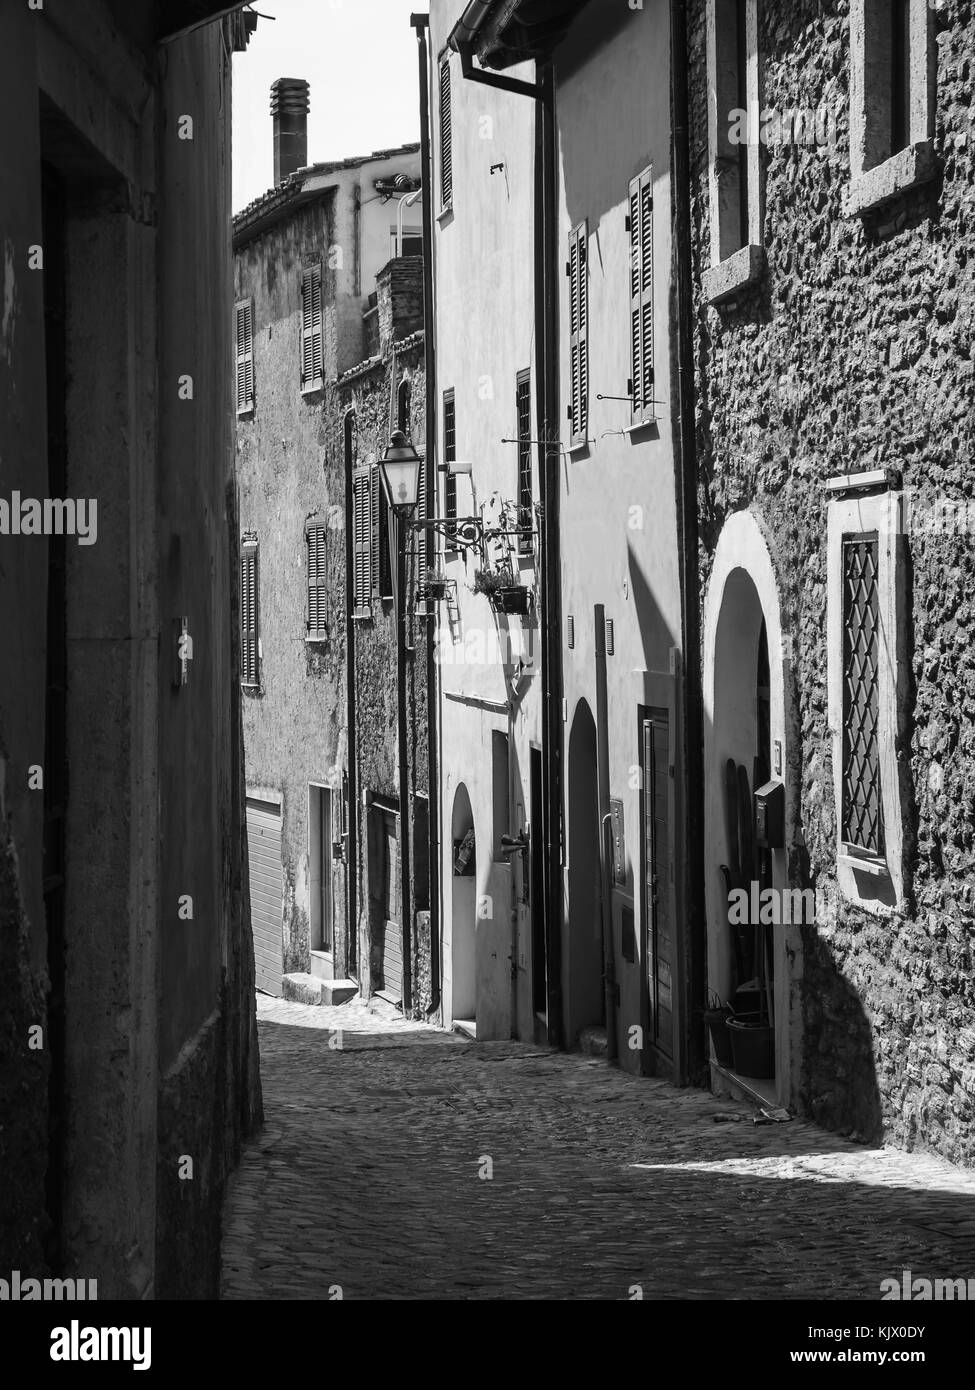 Typical italian small alley in a small town cleaned by all the wires Stock Photo